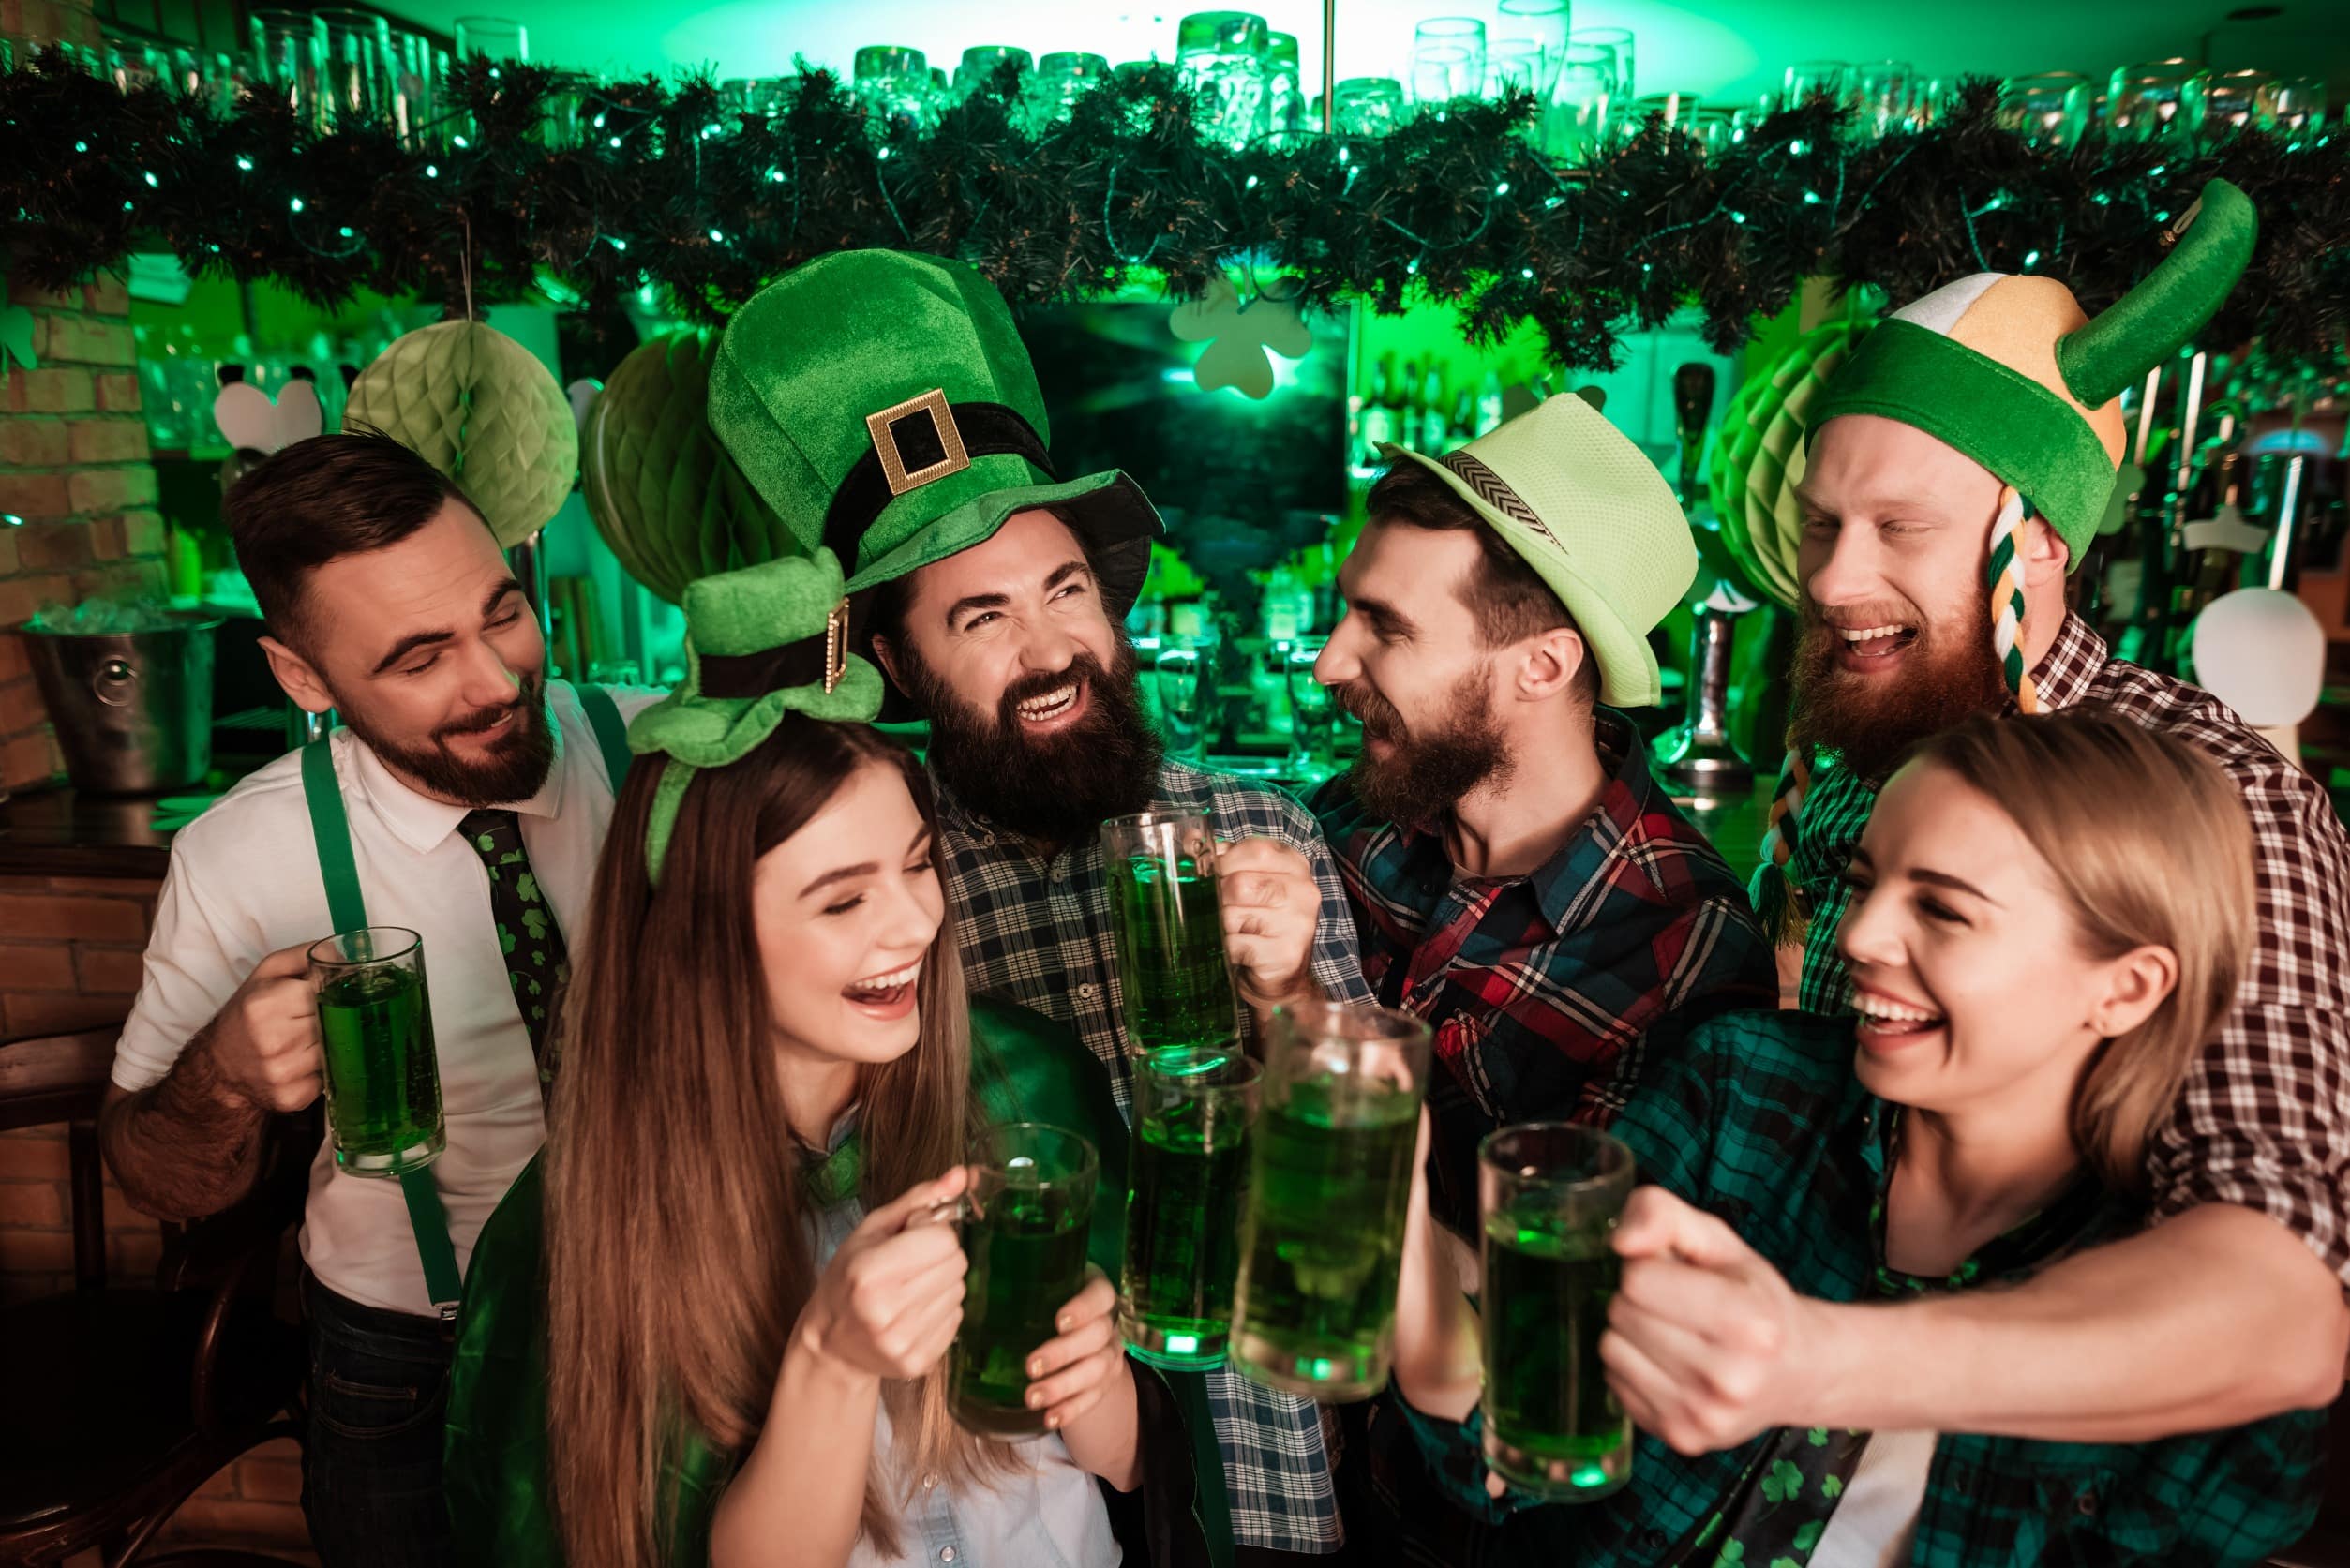 Injured at a St. Patrick's Celebration? Know Your Rights